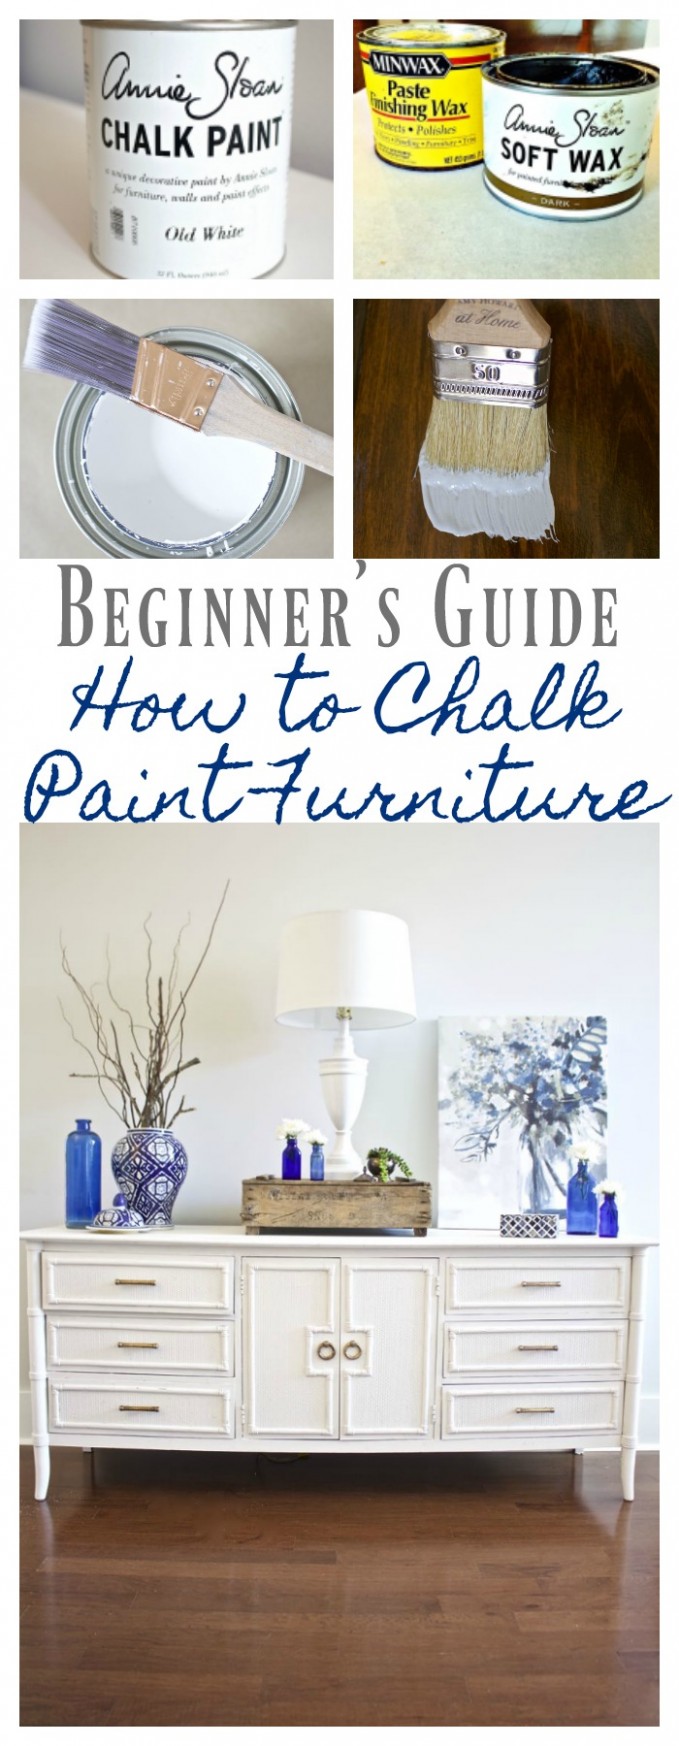 How To Chalk Paint Furniture Our Best Tips 7 Bees In A Pod Annie Sloan Chalk Paint Examples